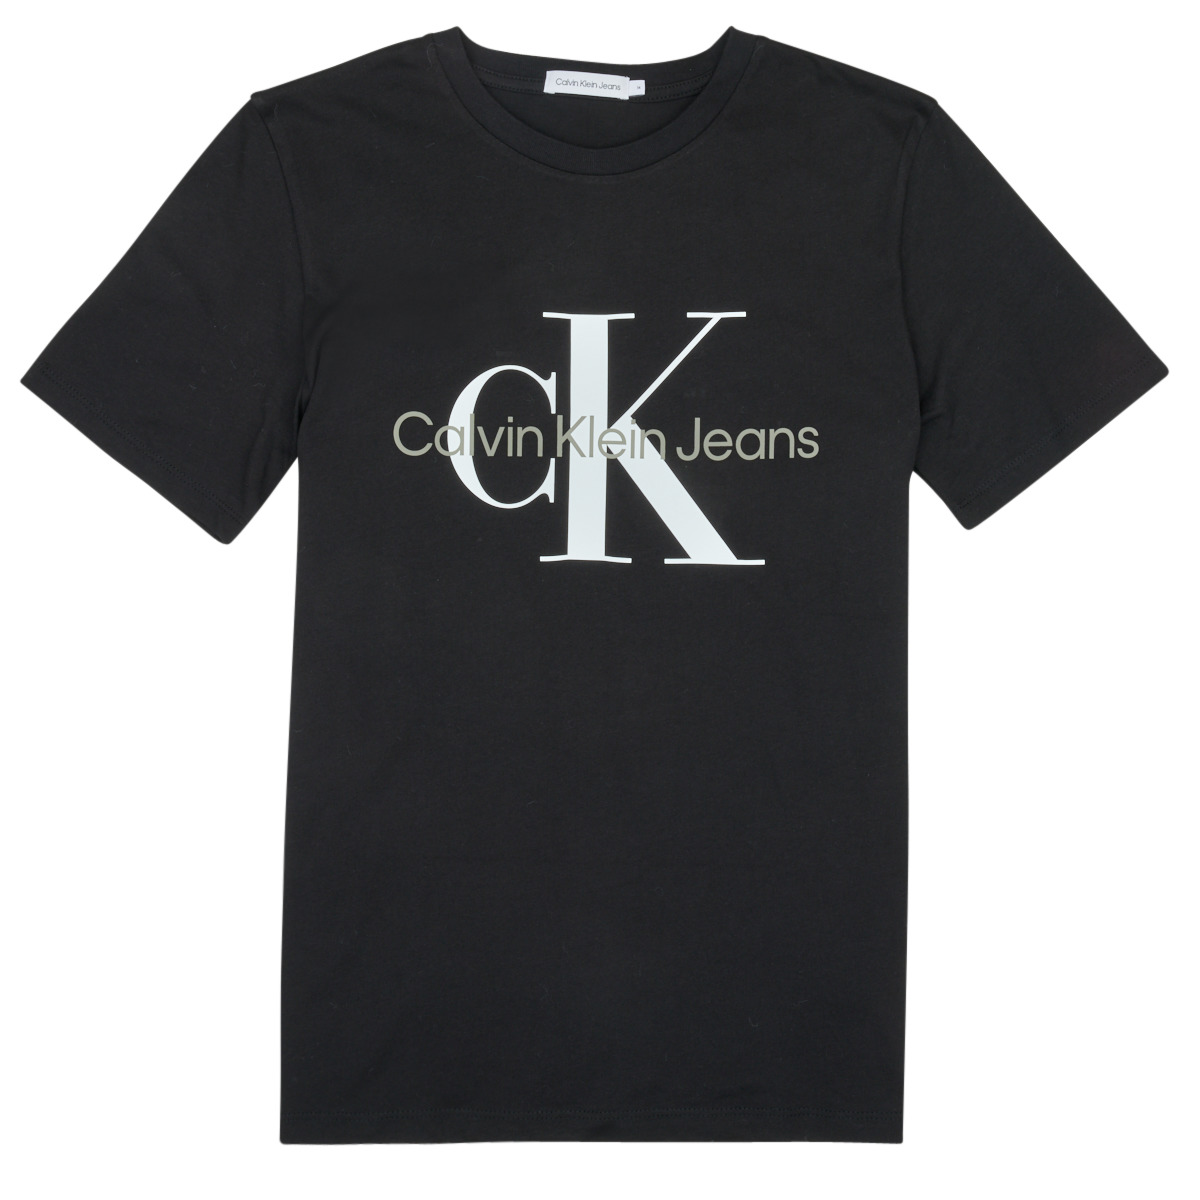 Calvin Klein Jeans Clothing | Free ! Child Spartoo Black T-SHIRT - NET MONOGRAM LOGO t-shirts delivery - short-sleeved